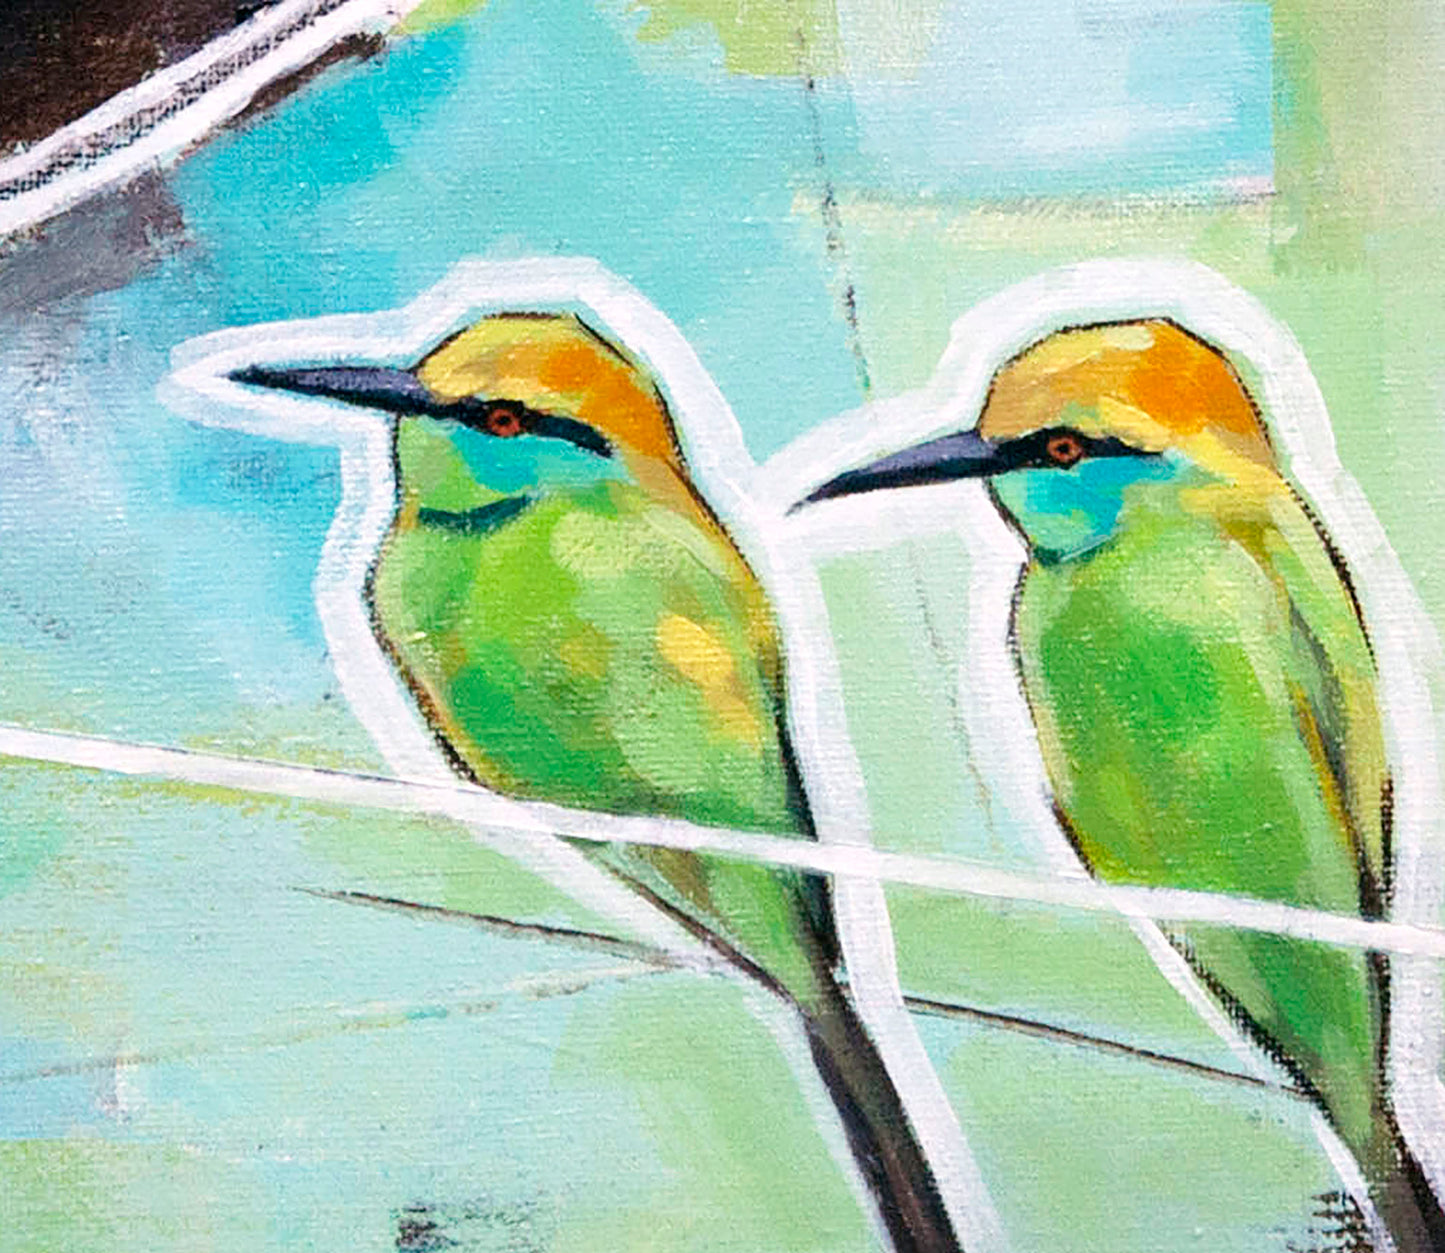 Eye of The Storm - a pair of birds on a wire, abstract wall decor